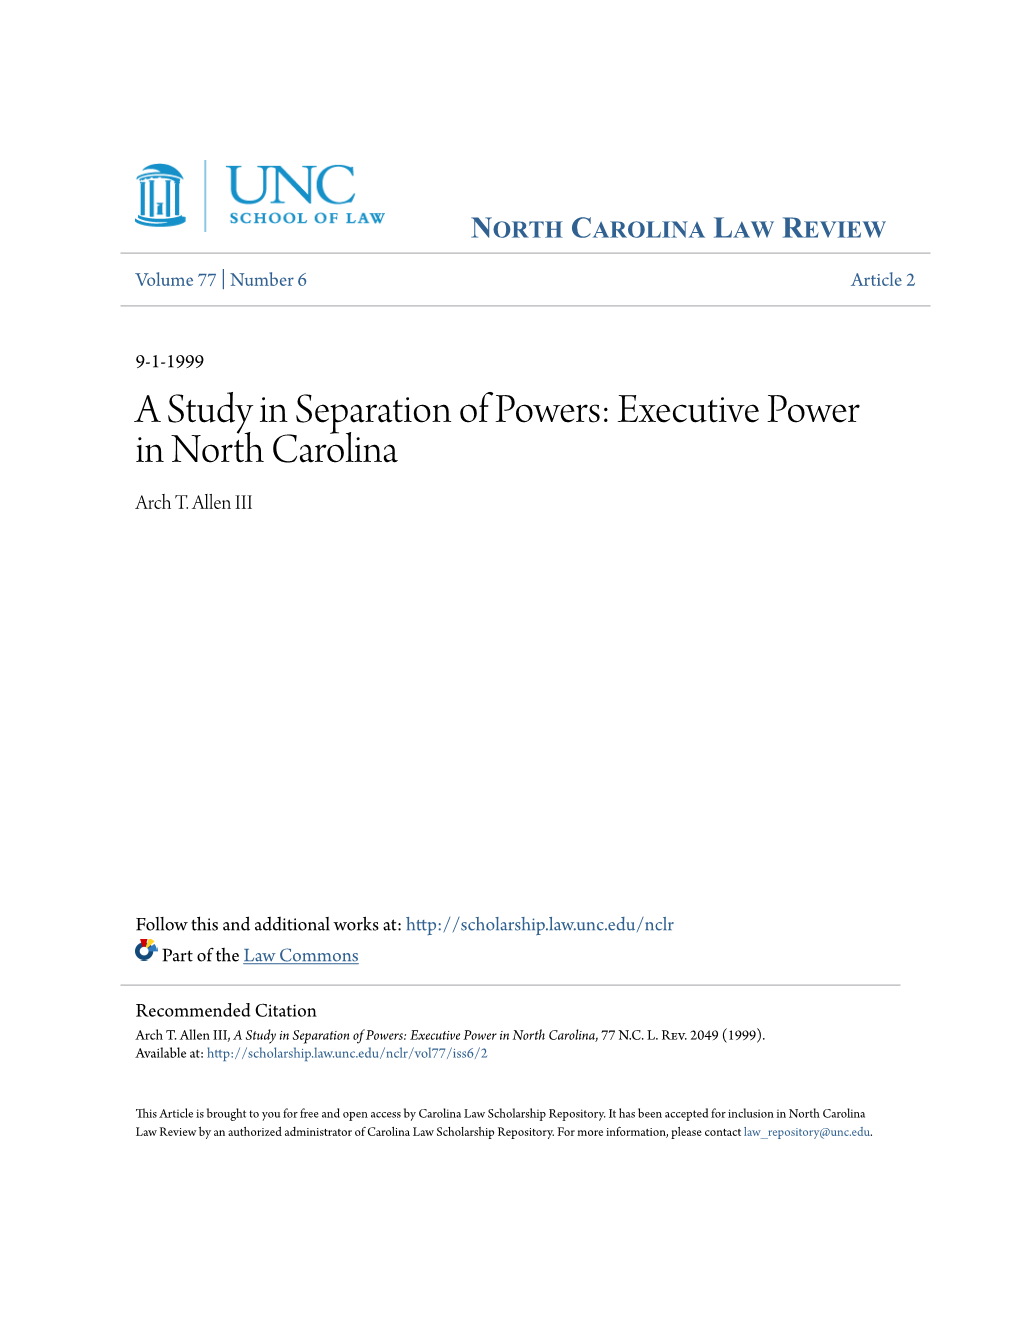 A Study in Separation of Powers: Executive Power in North Carolina Arch T